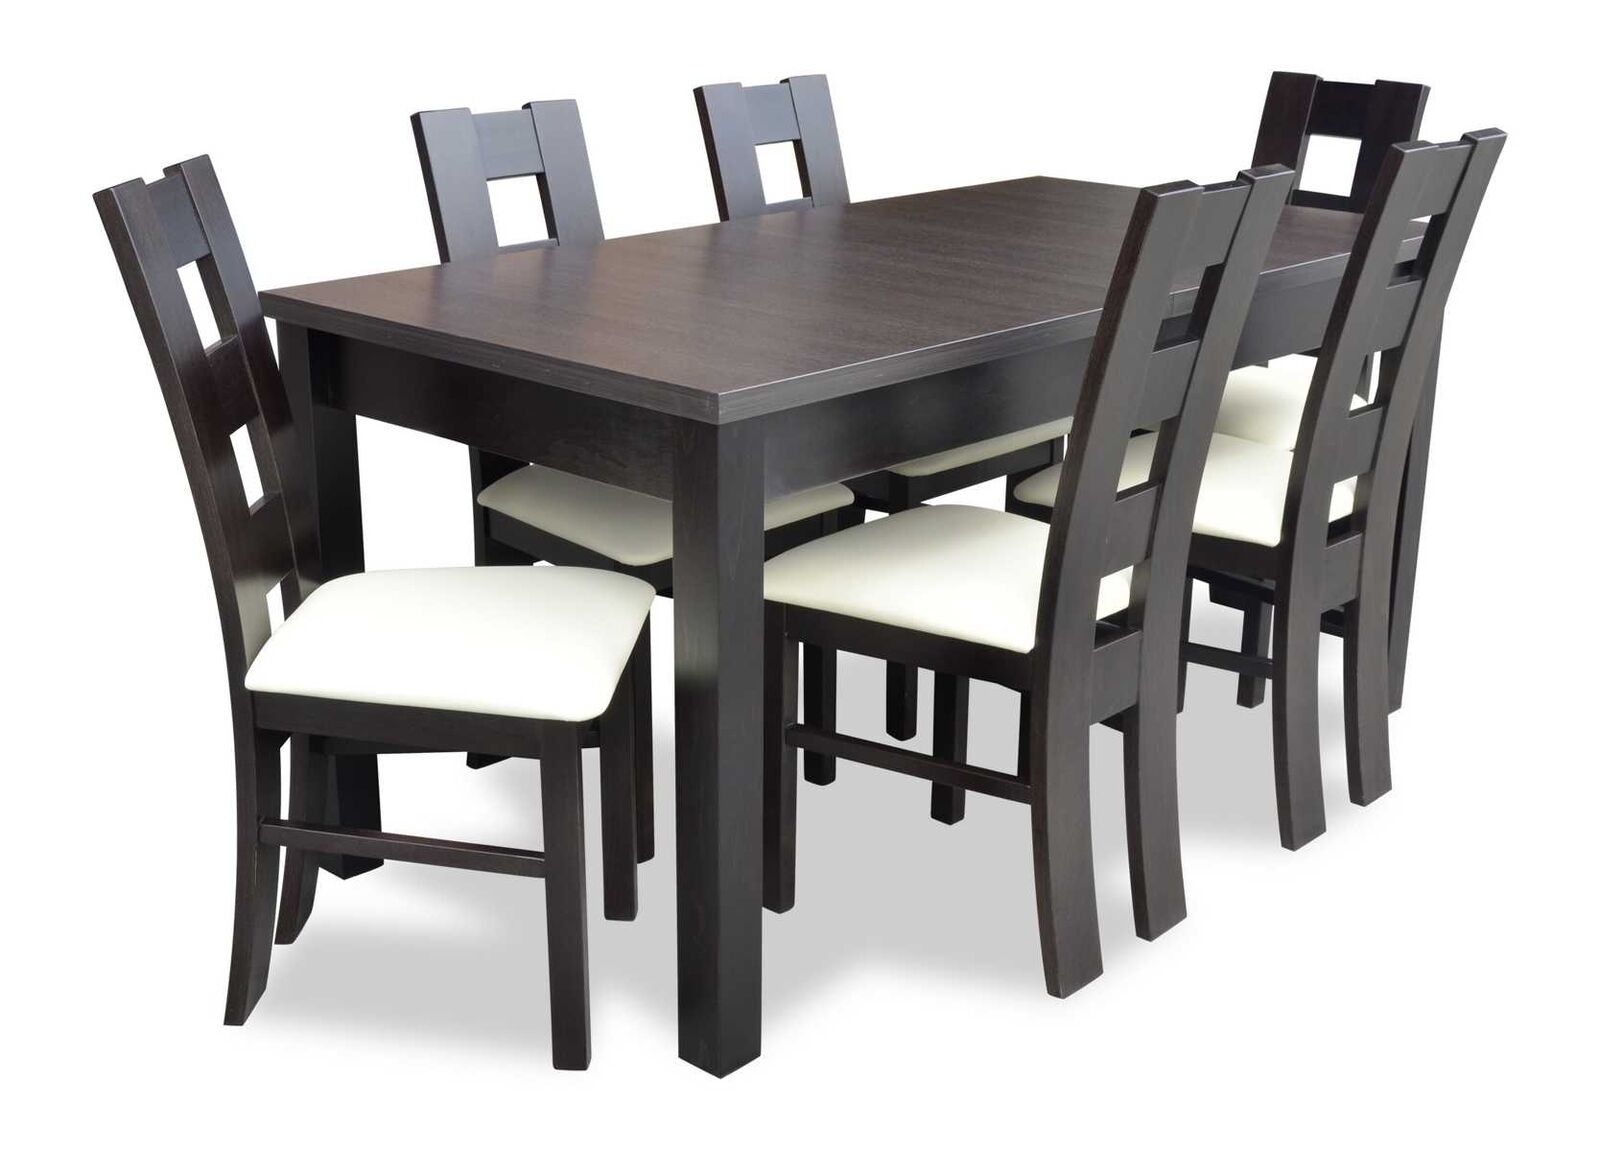 Classic dining table table wood dining room set 6x chairs set 7 pieces.